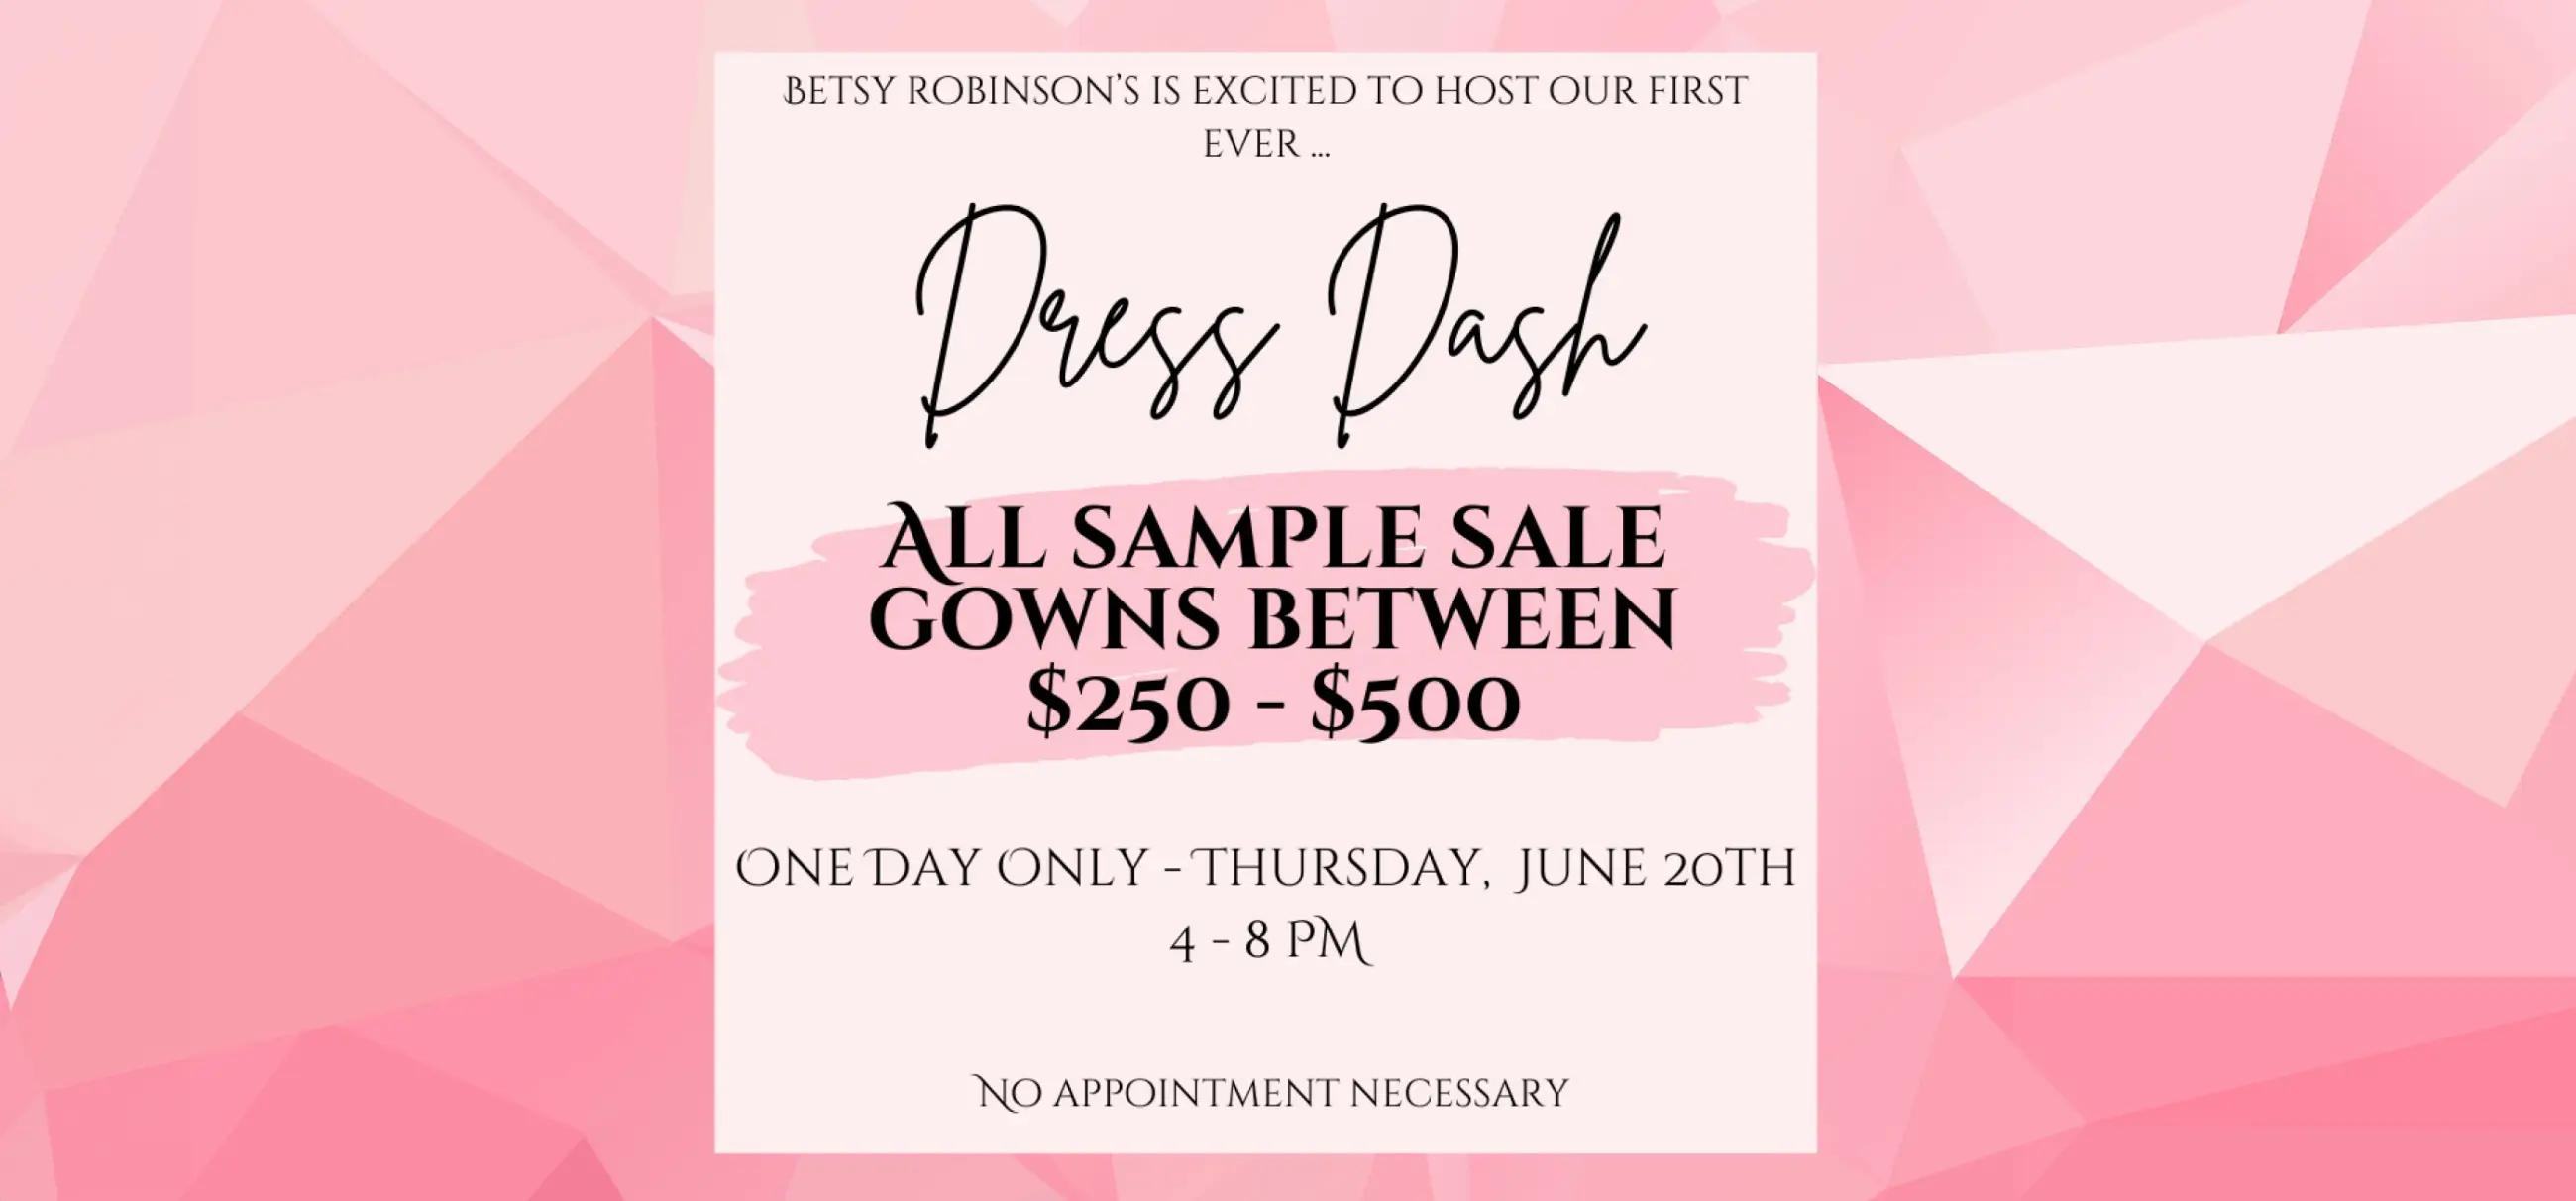 Dress Dash, all sample sale bridal gowns between 250-500